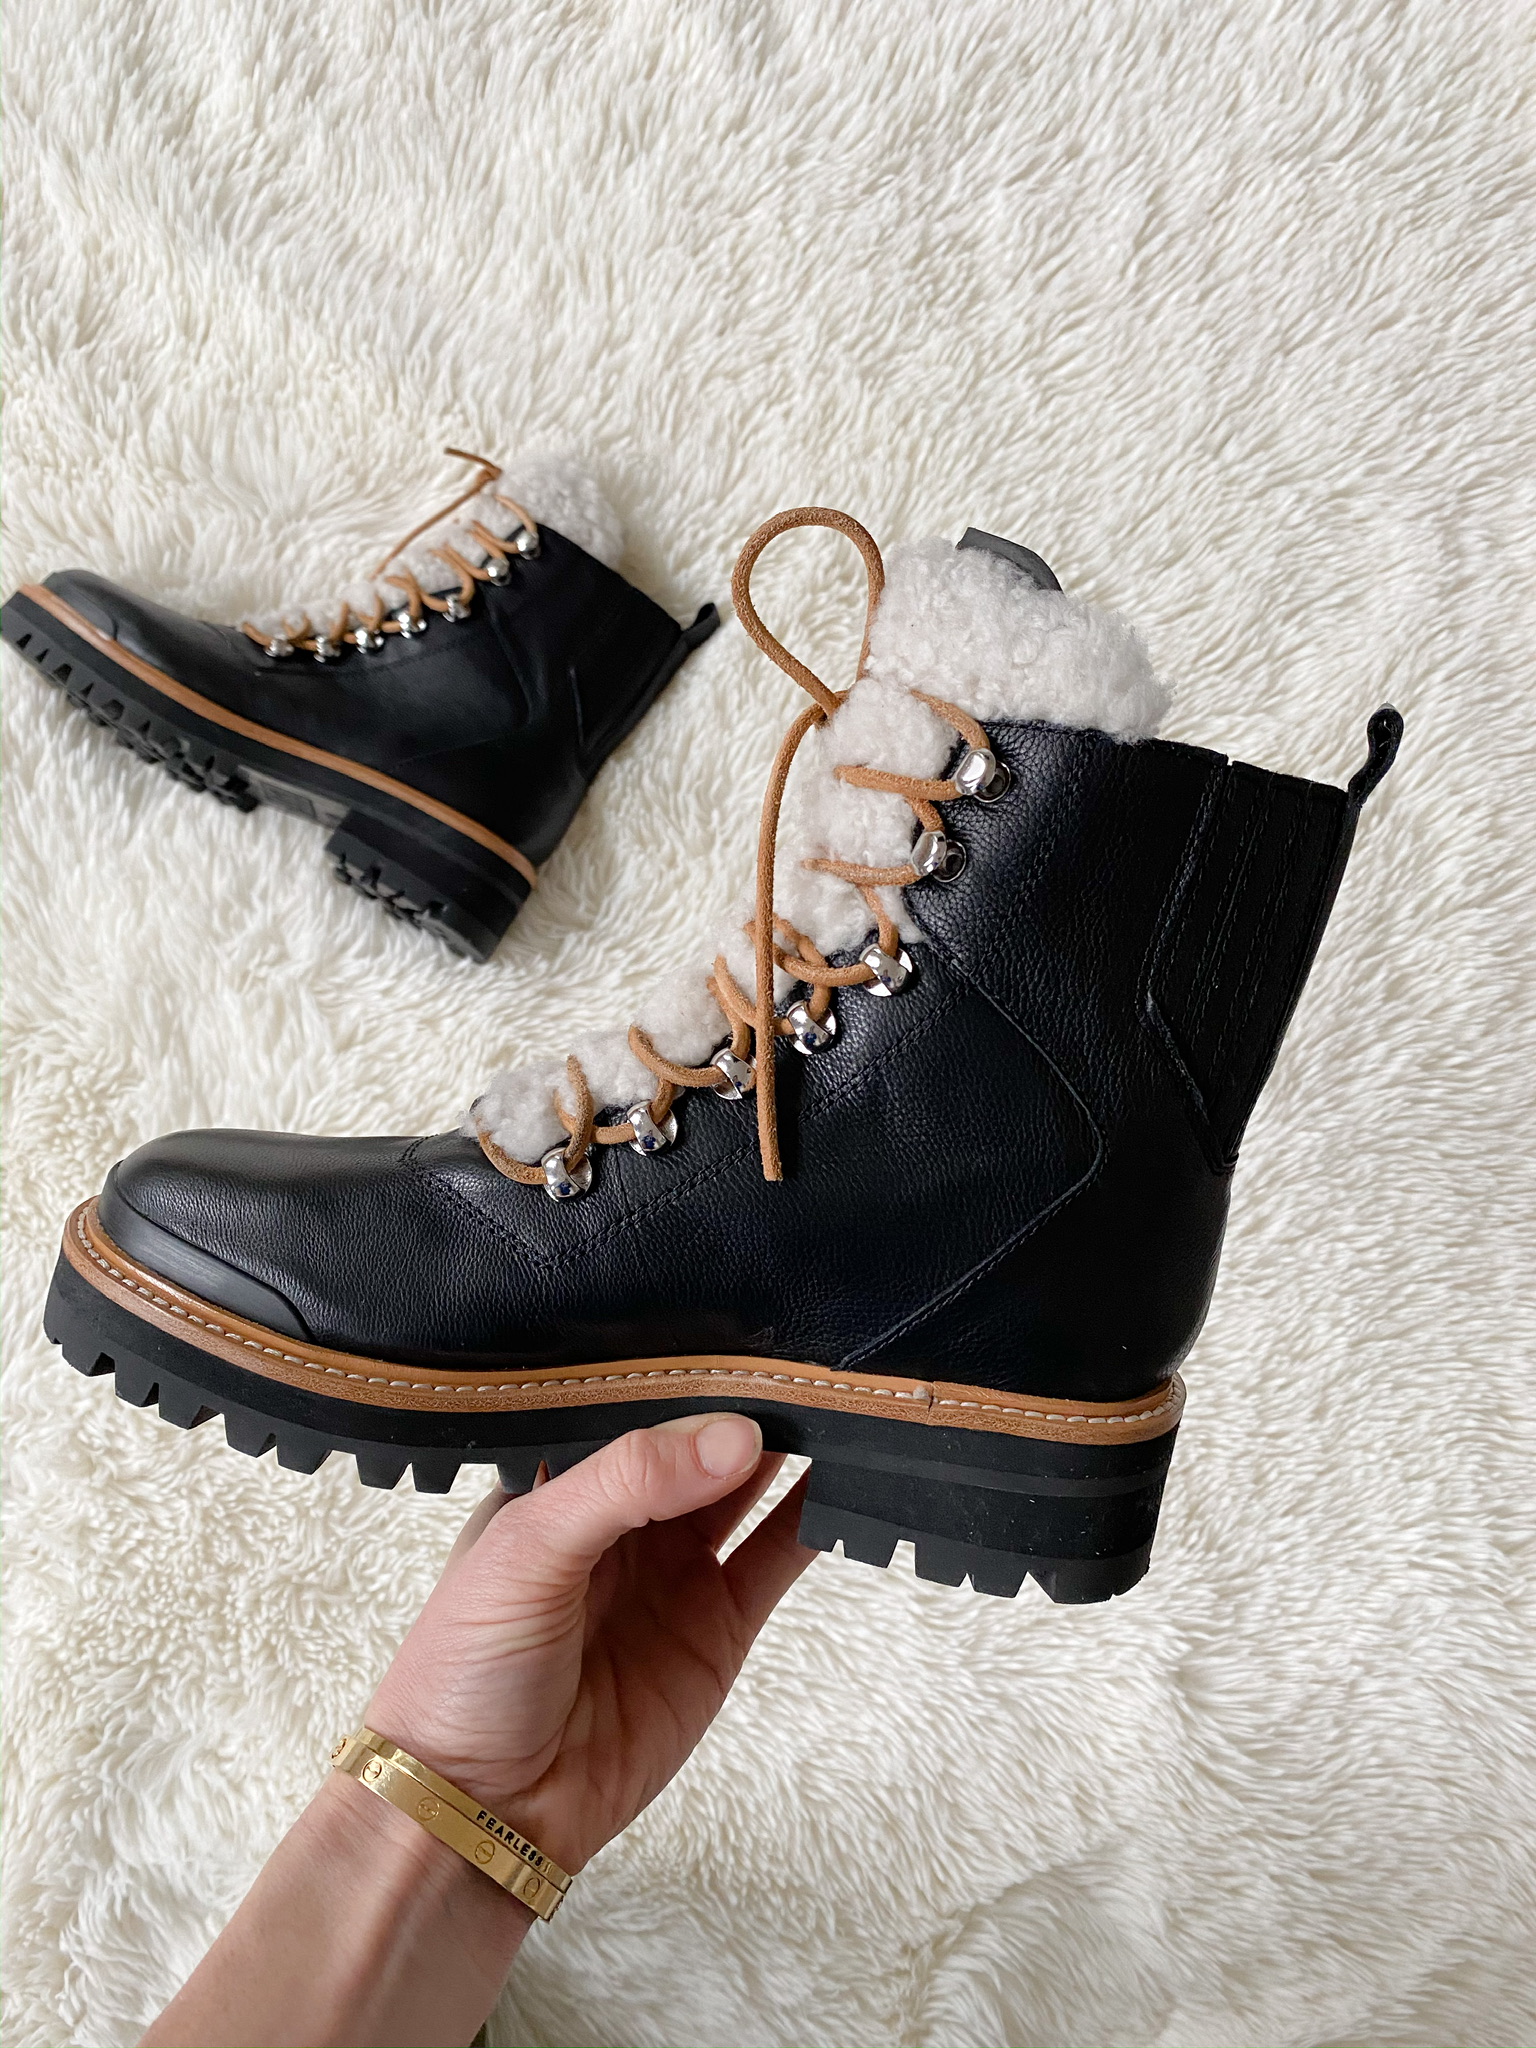 Winter boots, best November purchases, what to wear this winter, ski trip boots, lace up boots, fur lined boots, black combat boots